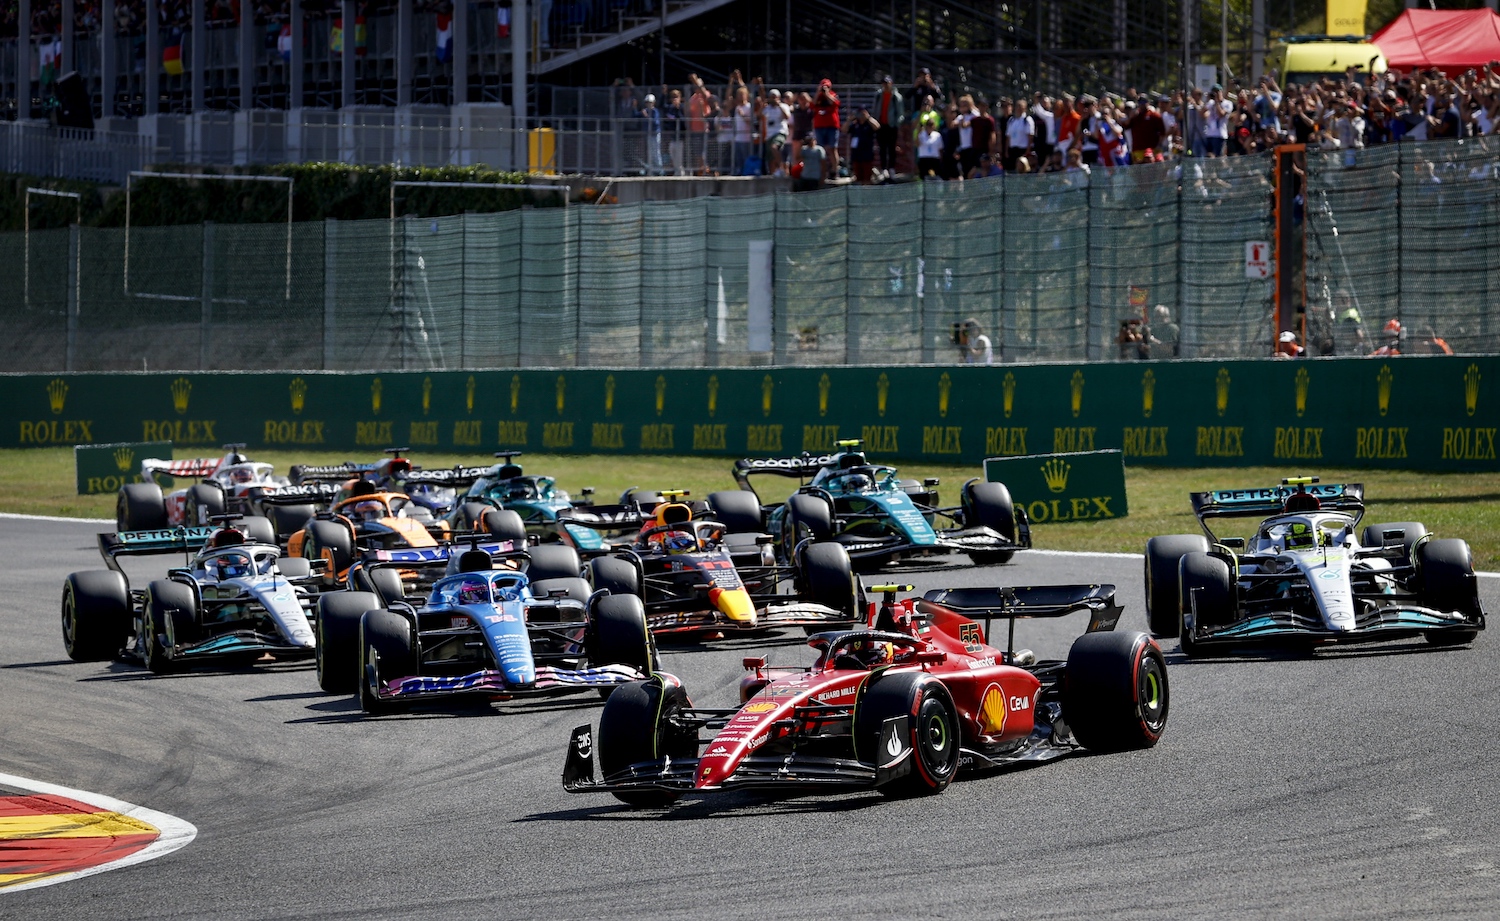 A group of 2022 Formula 1 racing cars rounding a corner during the Belgian Grand Prix, the audience visible in the background.